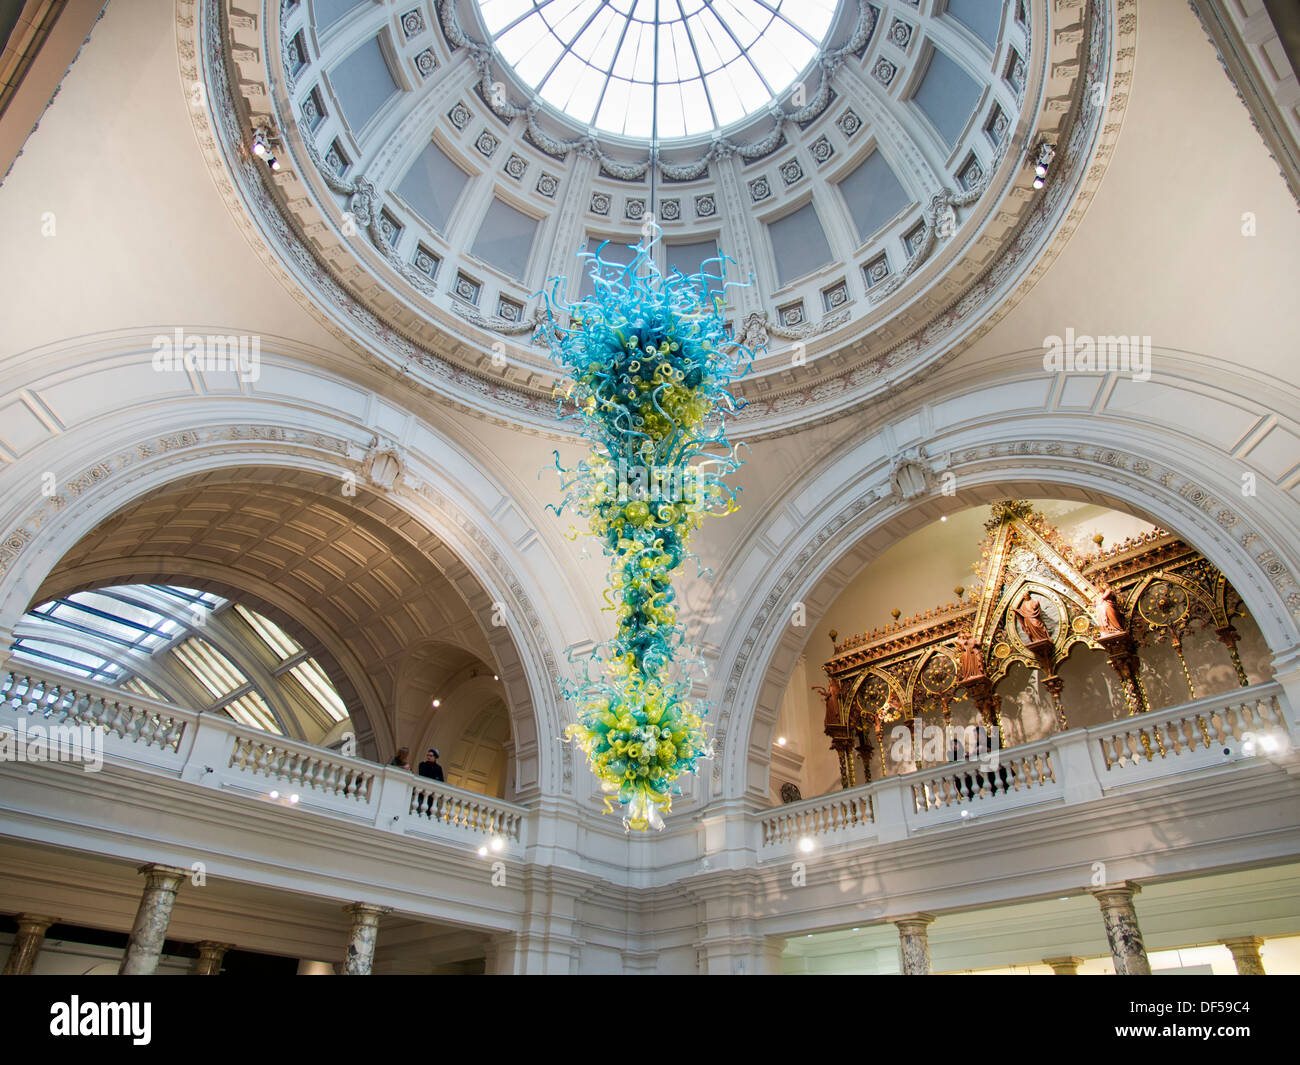 The Victoria and Albert Museum, London - hanging glass sculpture in the atrium. Stock Photo